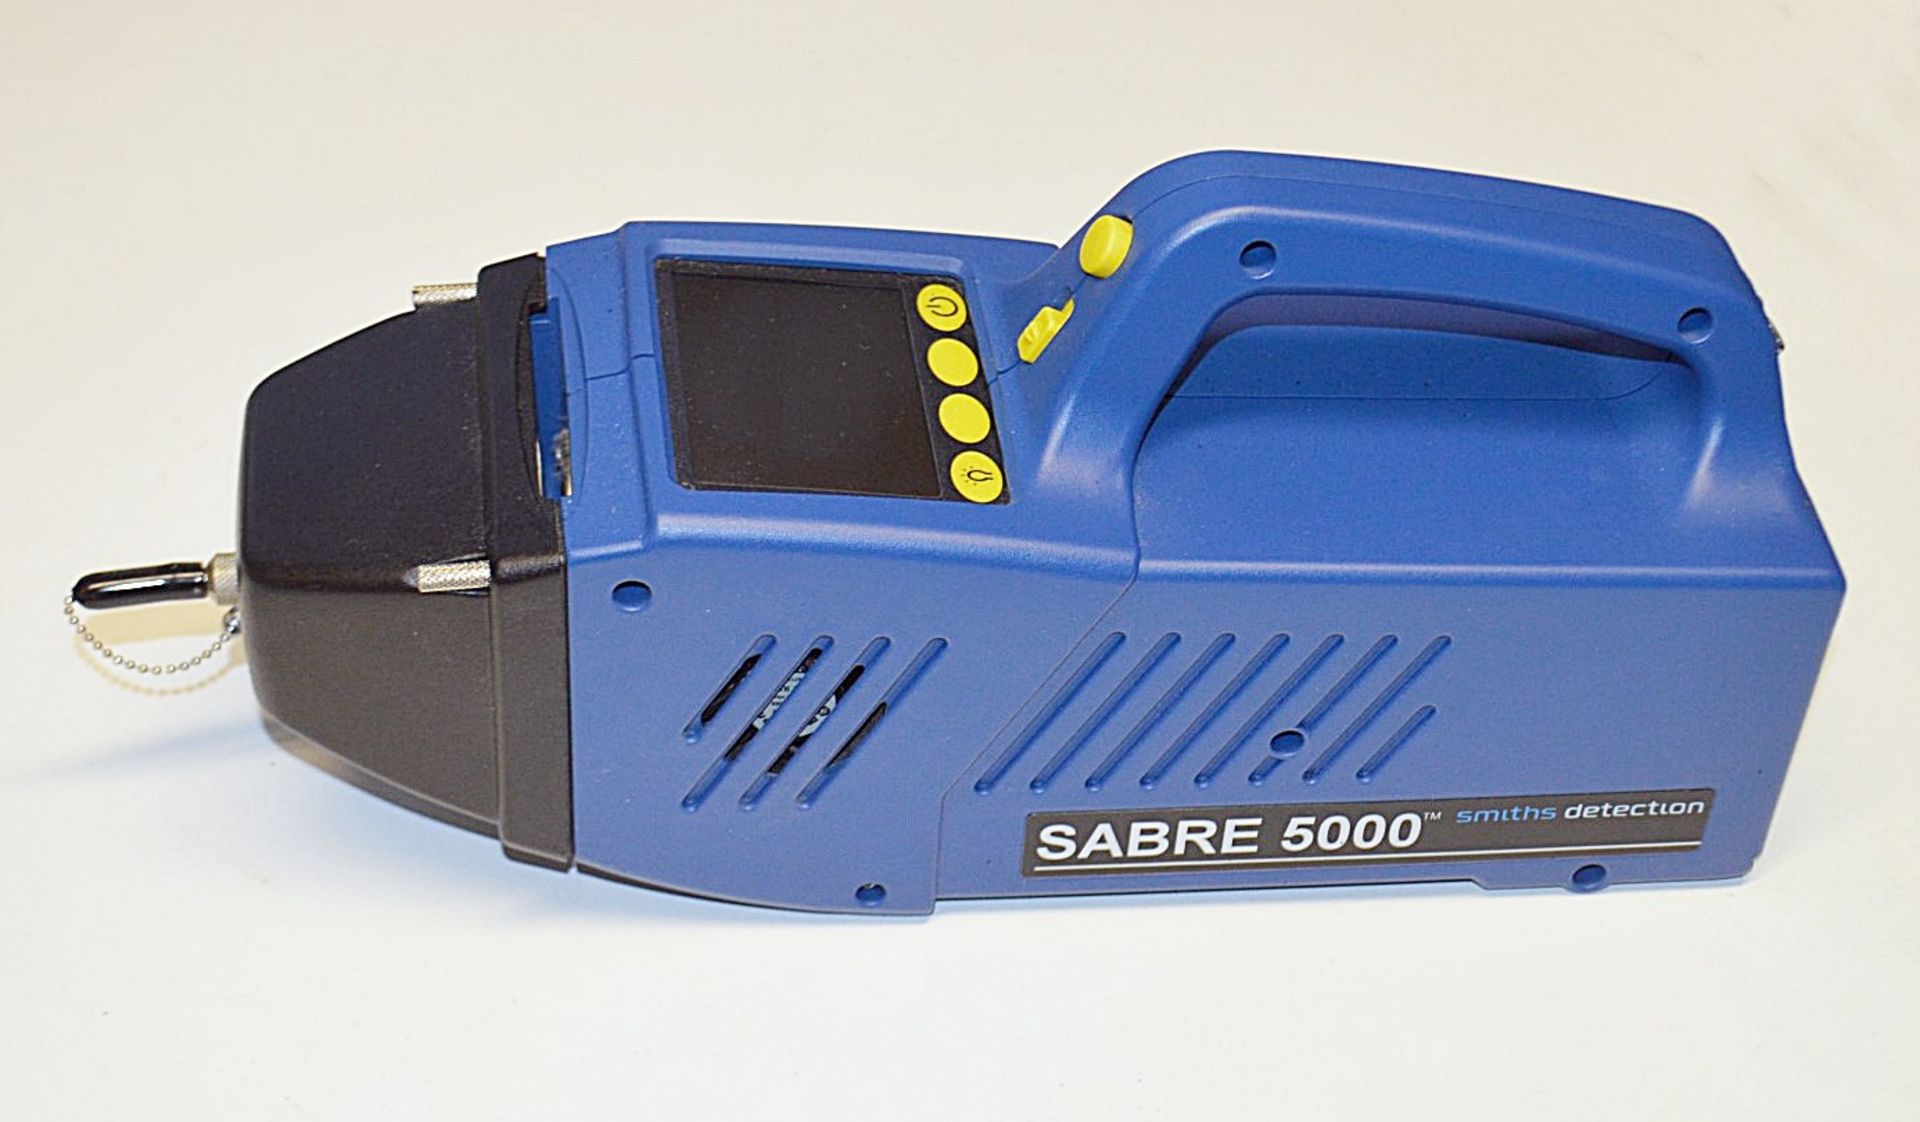 1 x SABRE™ 5000 Handheld Trace Detector - For Explosives, Chemical Agents - Original Price £24,500 - Image 8 of 31